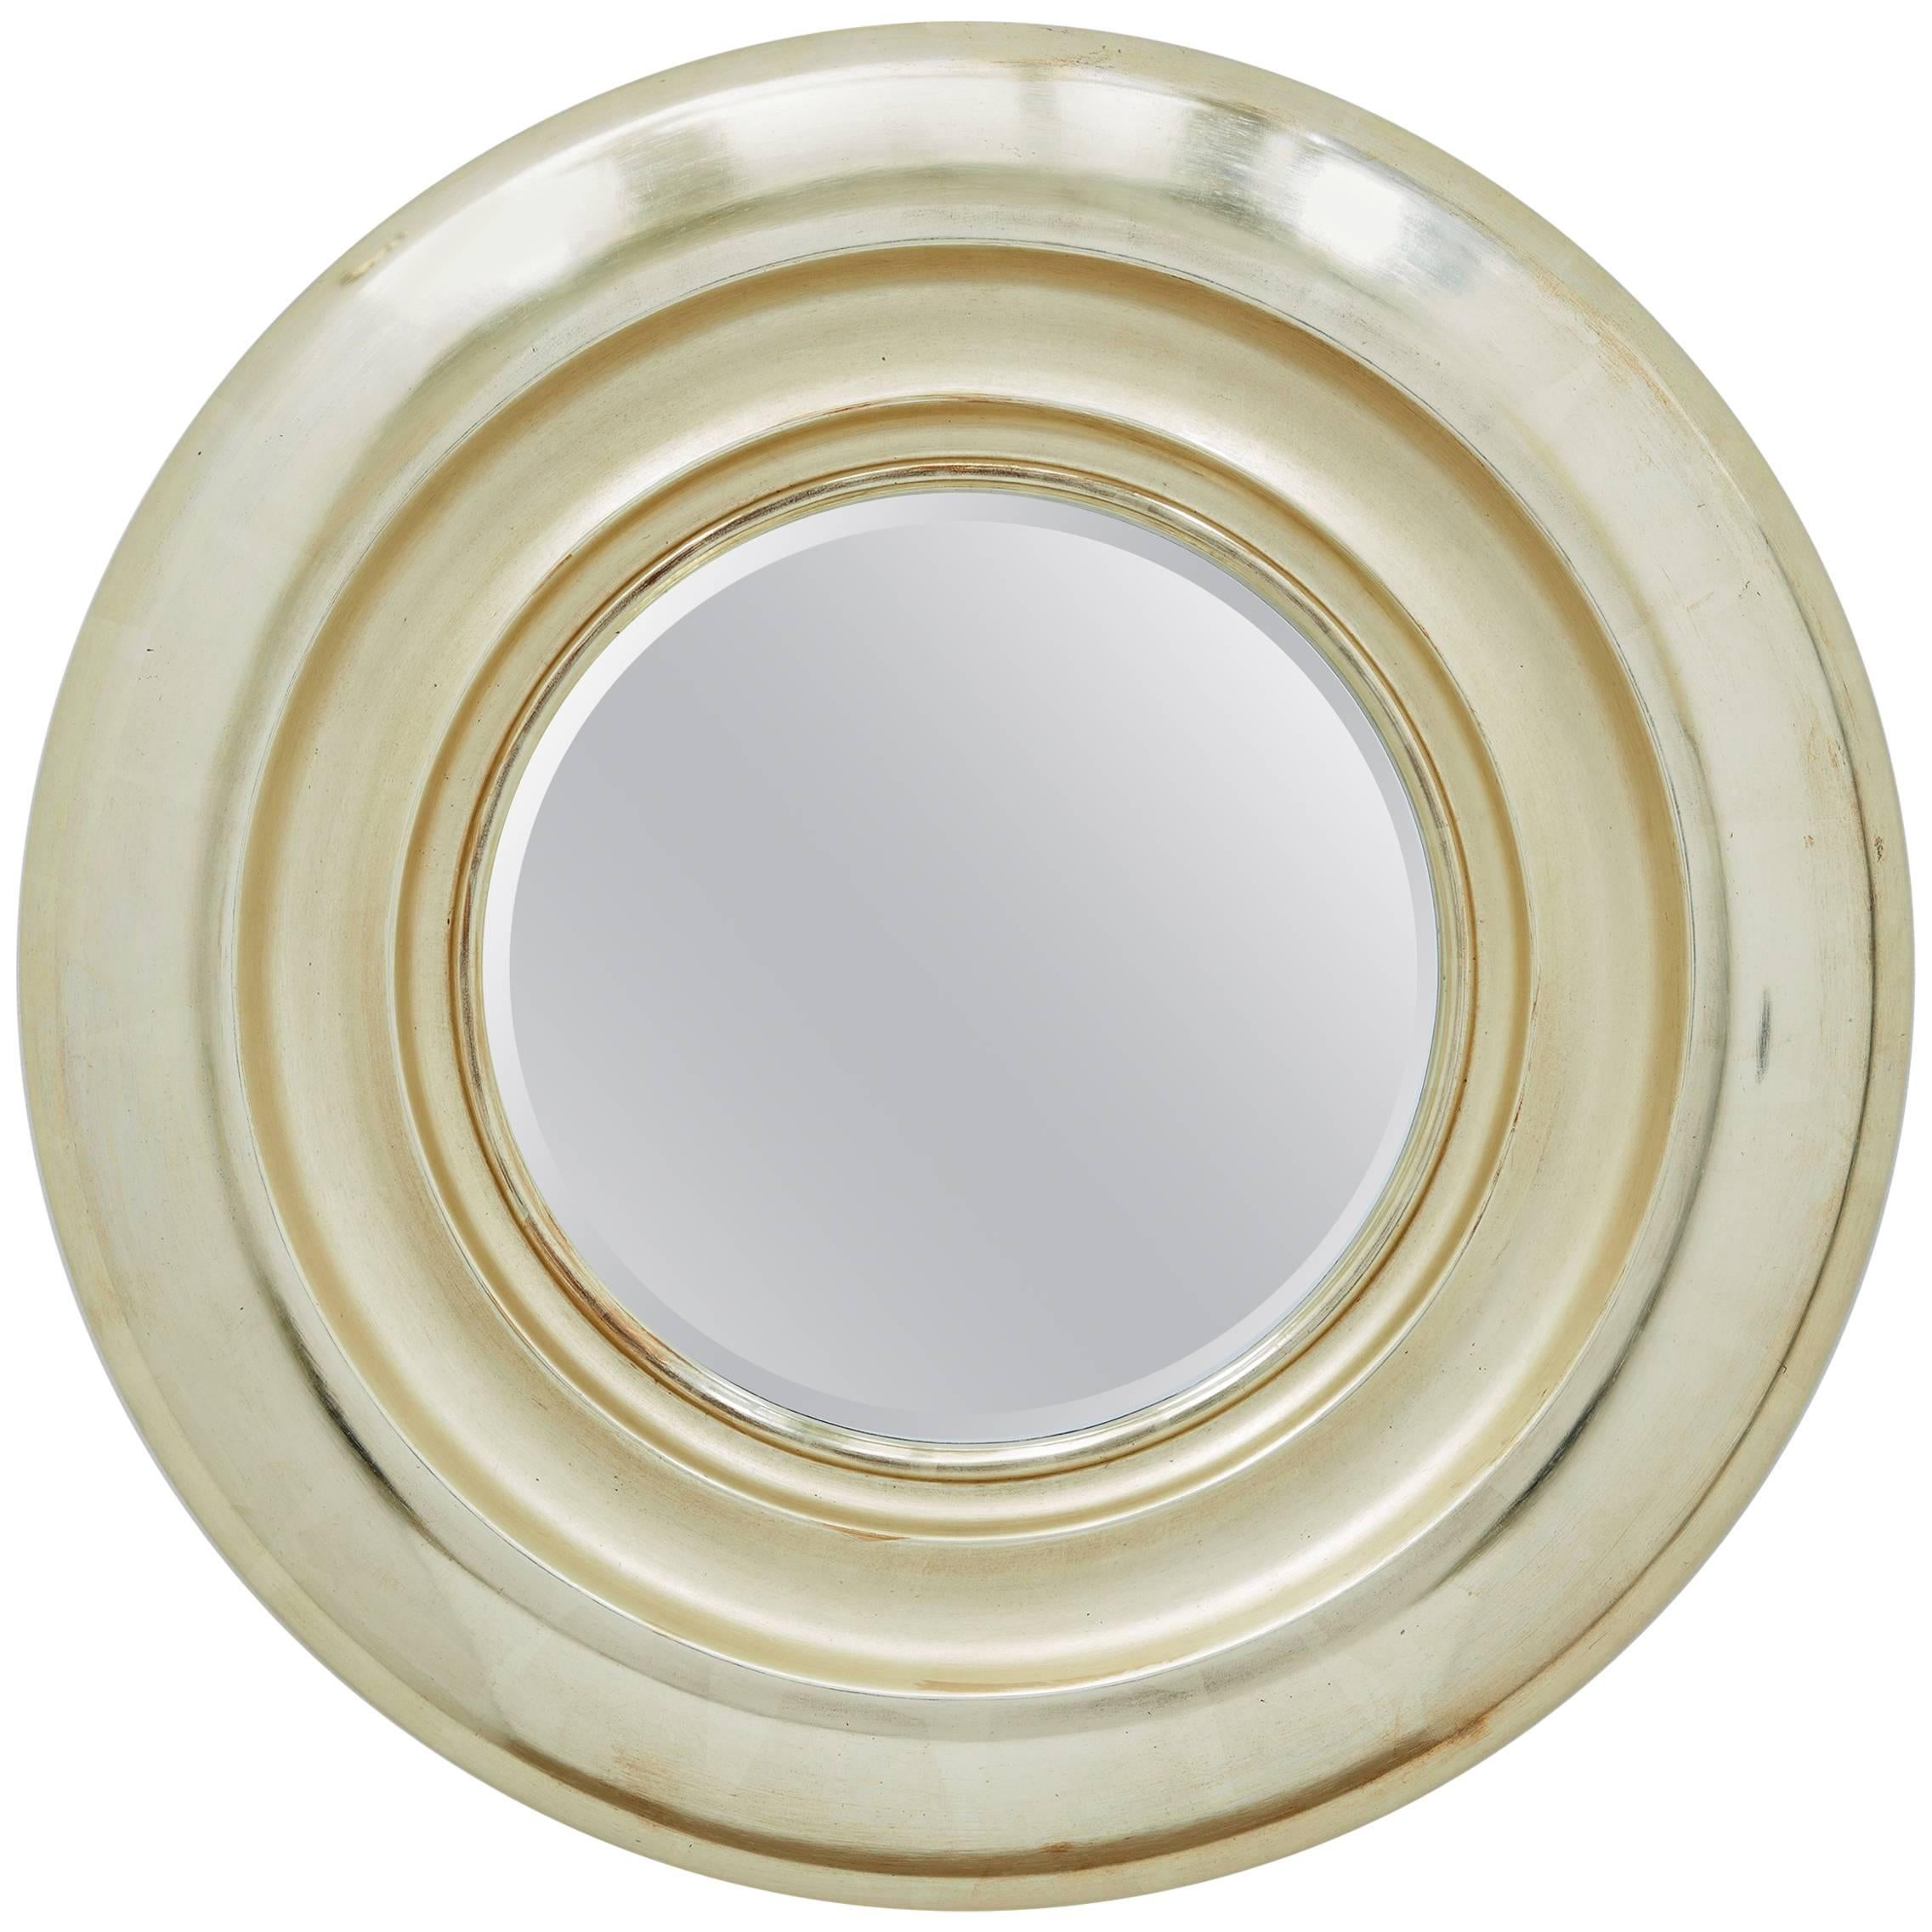 Degas Tondo No. 1 Circular Wall Mirror, Gilded in Pale Gold by Bark Frameworks For Sale